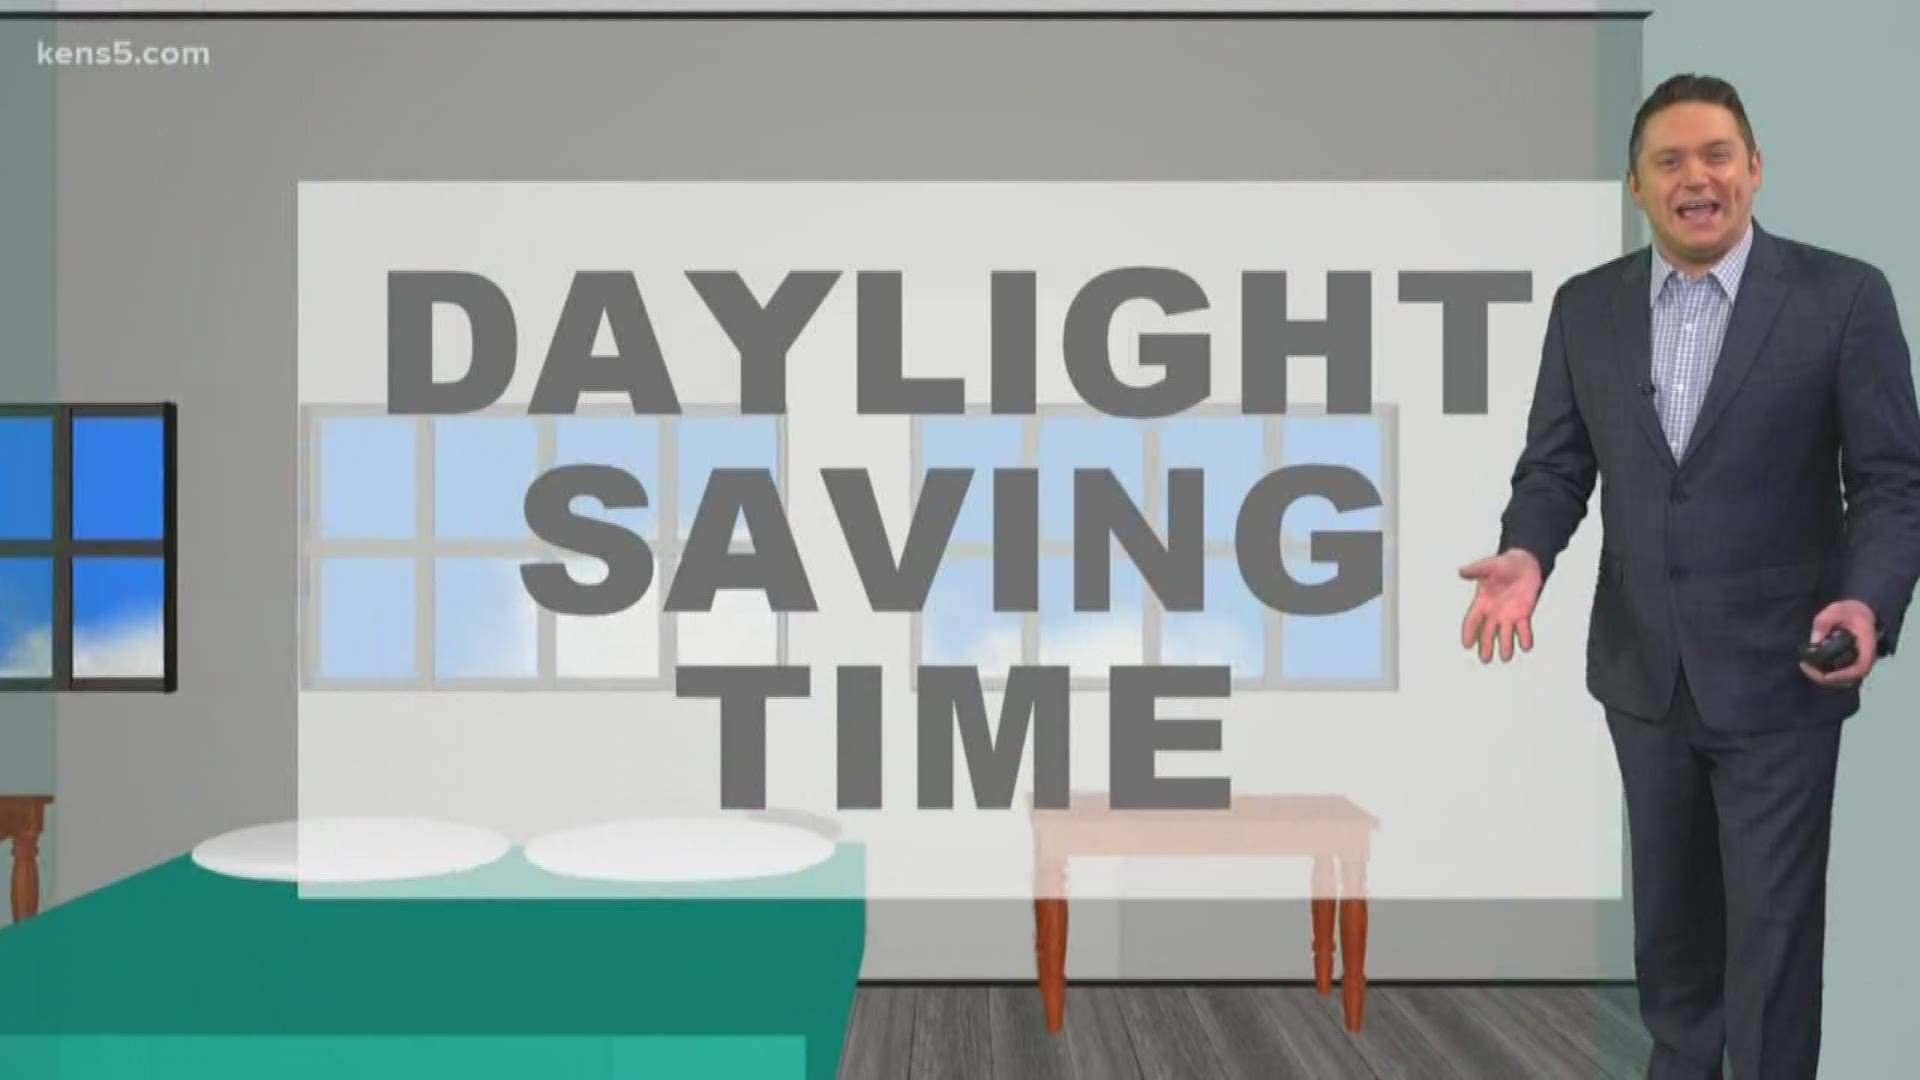 Sunday, March 10 is the beginning of Daylight Saving Time, but why do we "spring forward" and "fall back" each year?